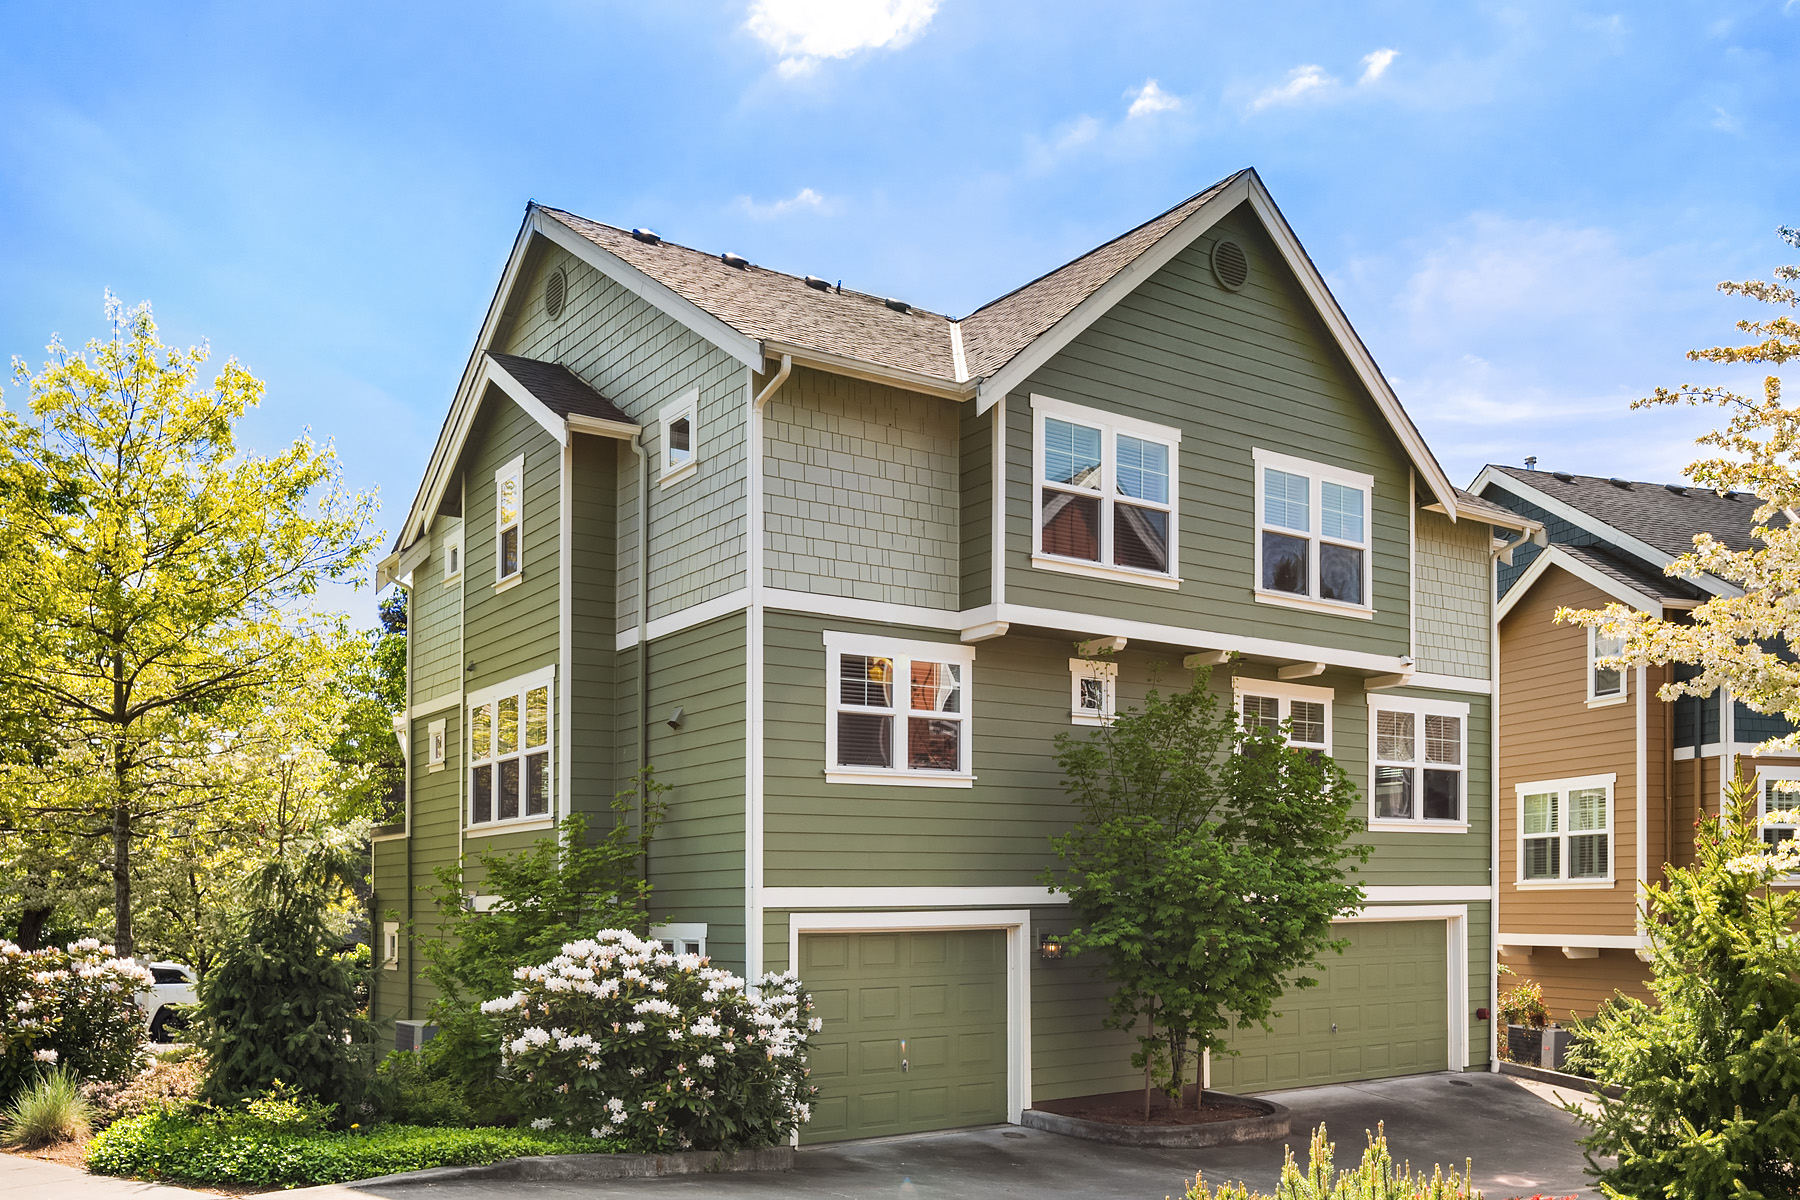 5801 55th Ave NE, Unit B, Seattle | Sold for $819,000